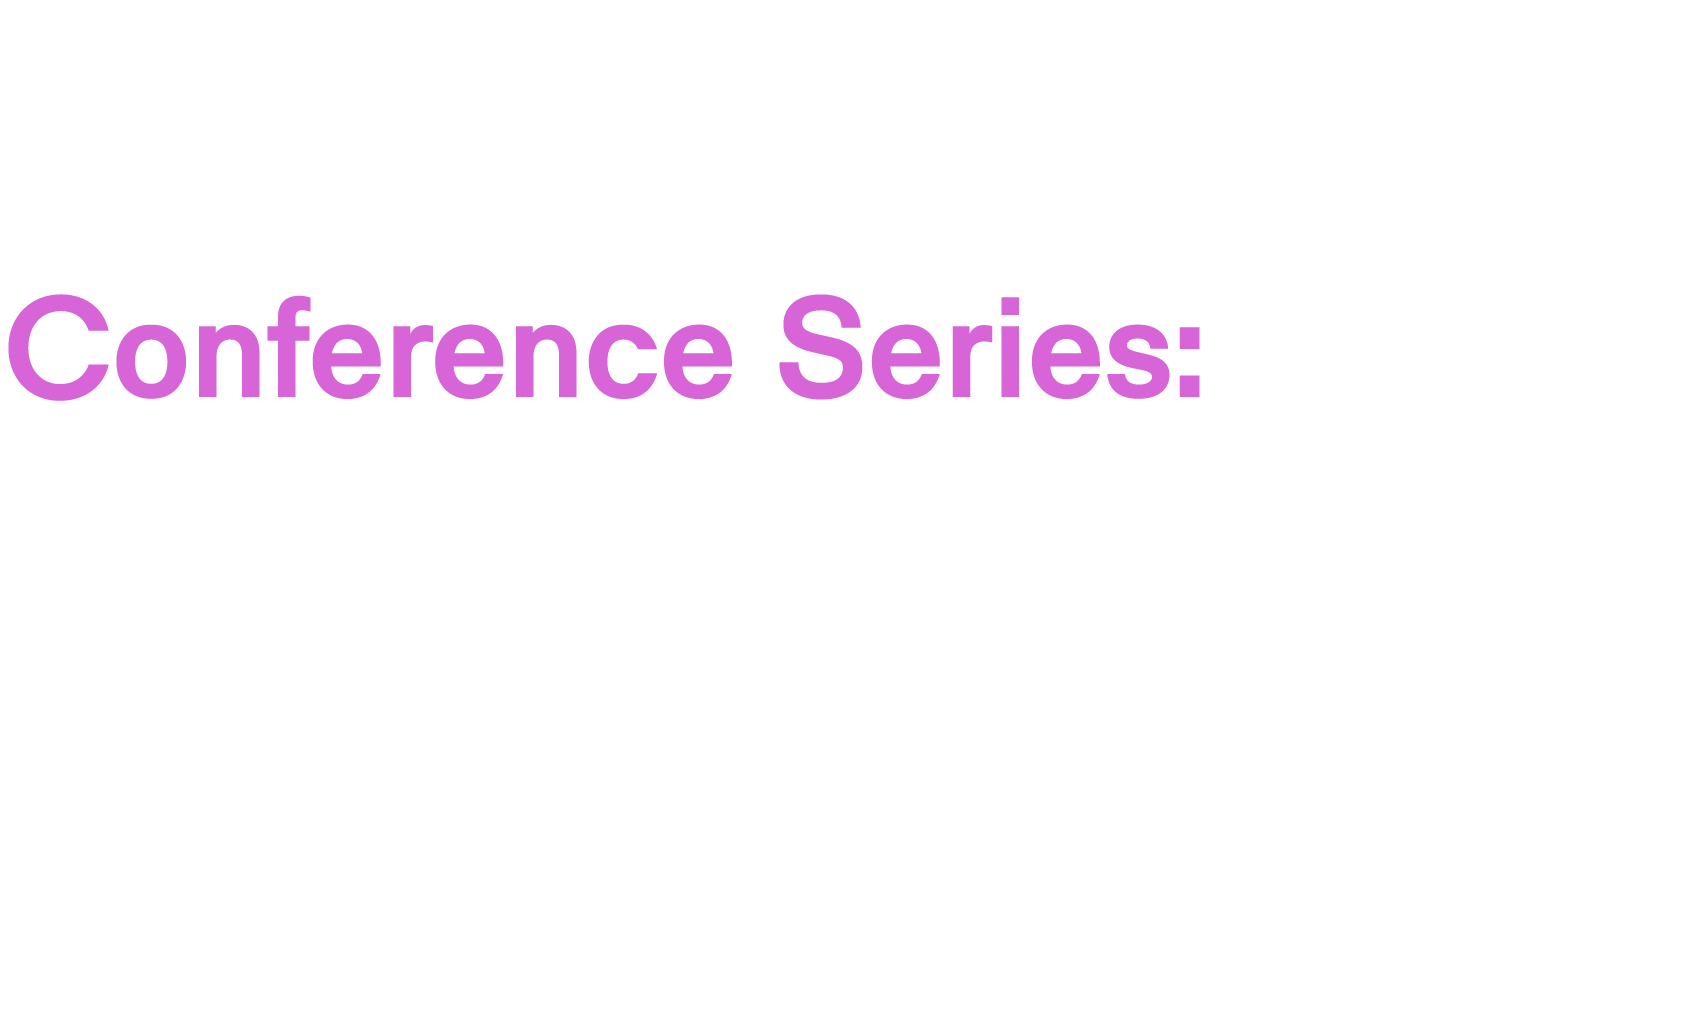 Conference Series: Diversity & Inclusion